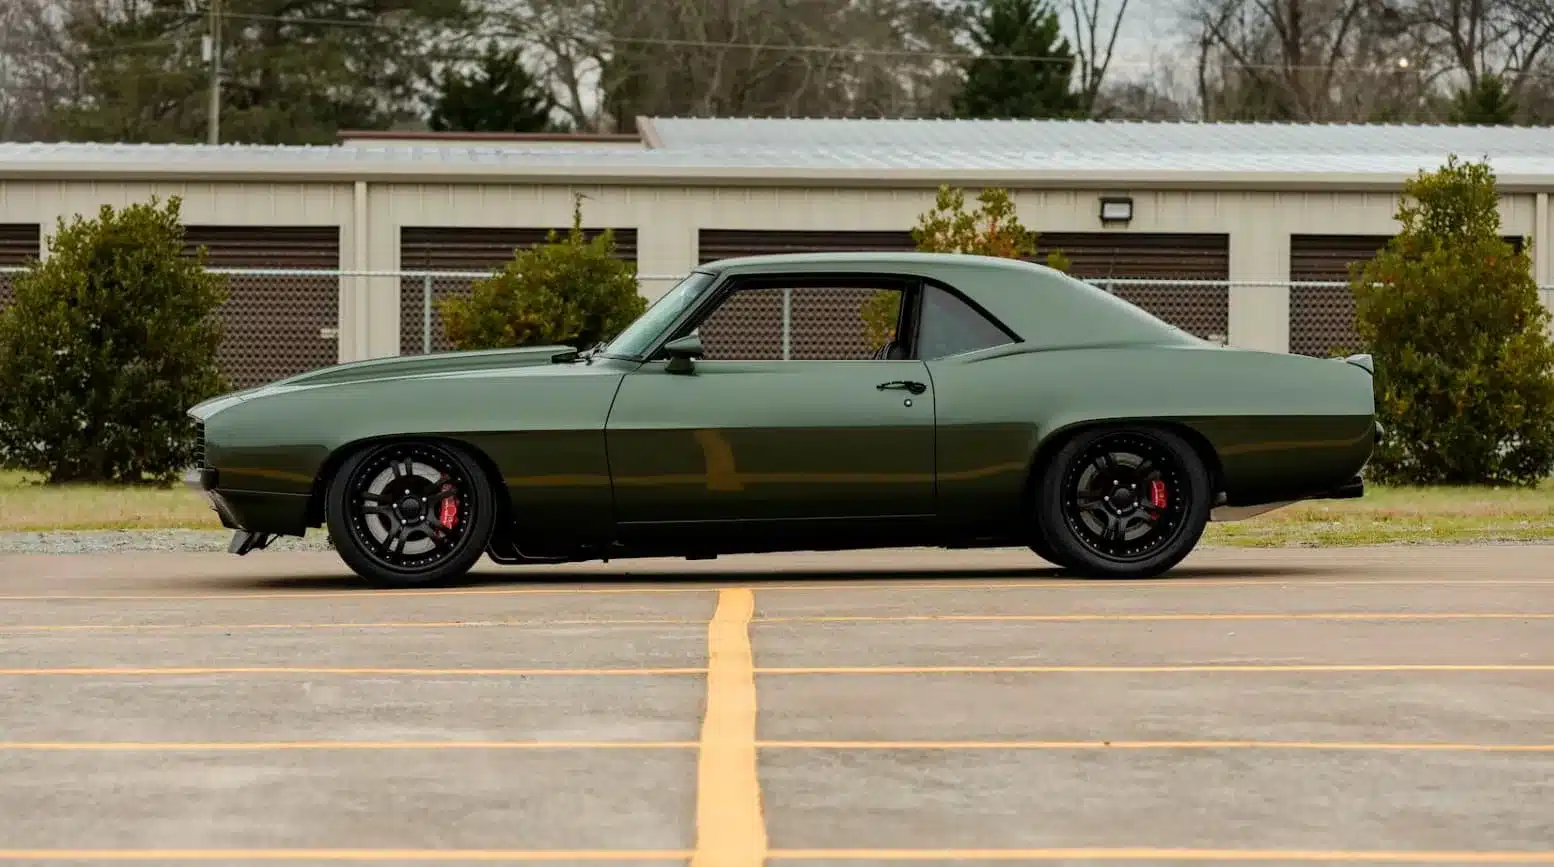 1969 Chevrolet Camaro Custom: A Classic Car with Modern Performance and Style